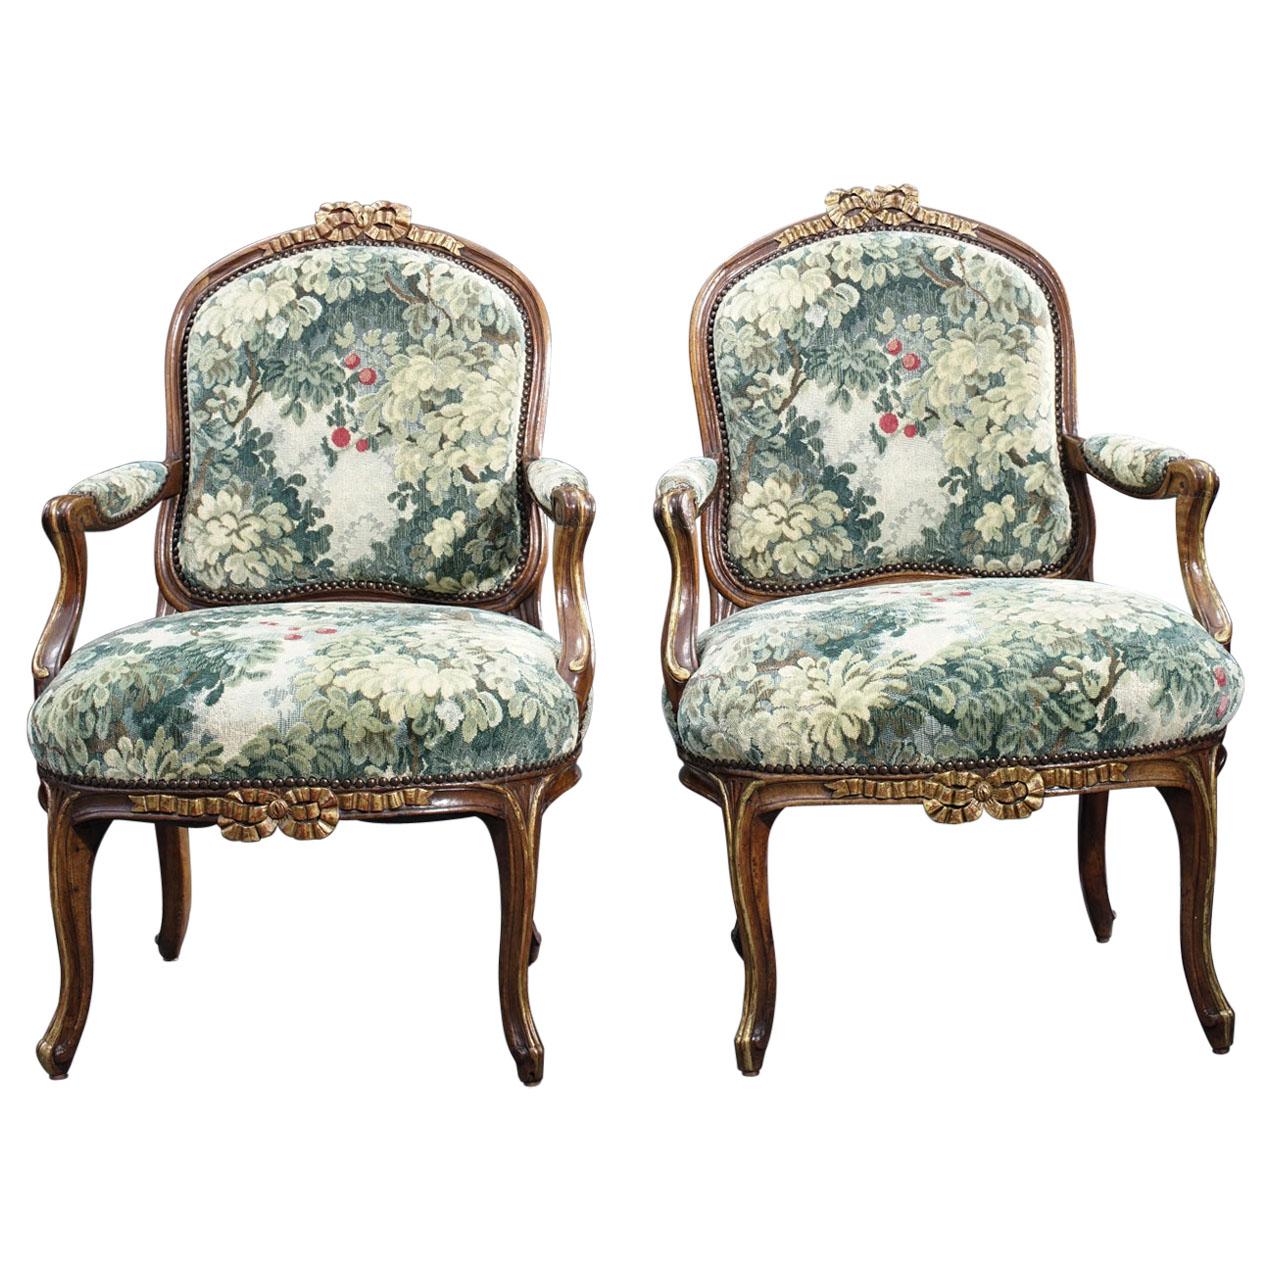 Pair of 19th Century French Walnut Armchairs